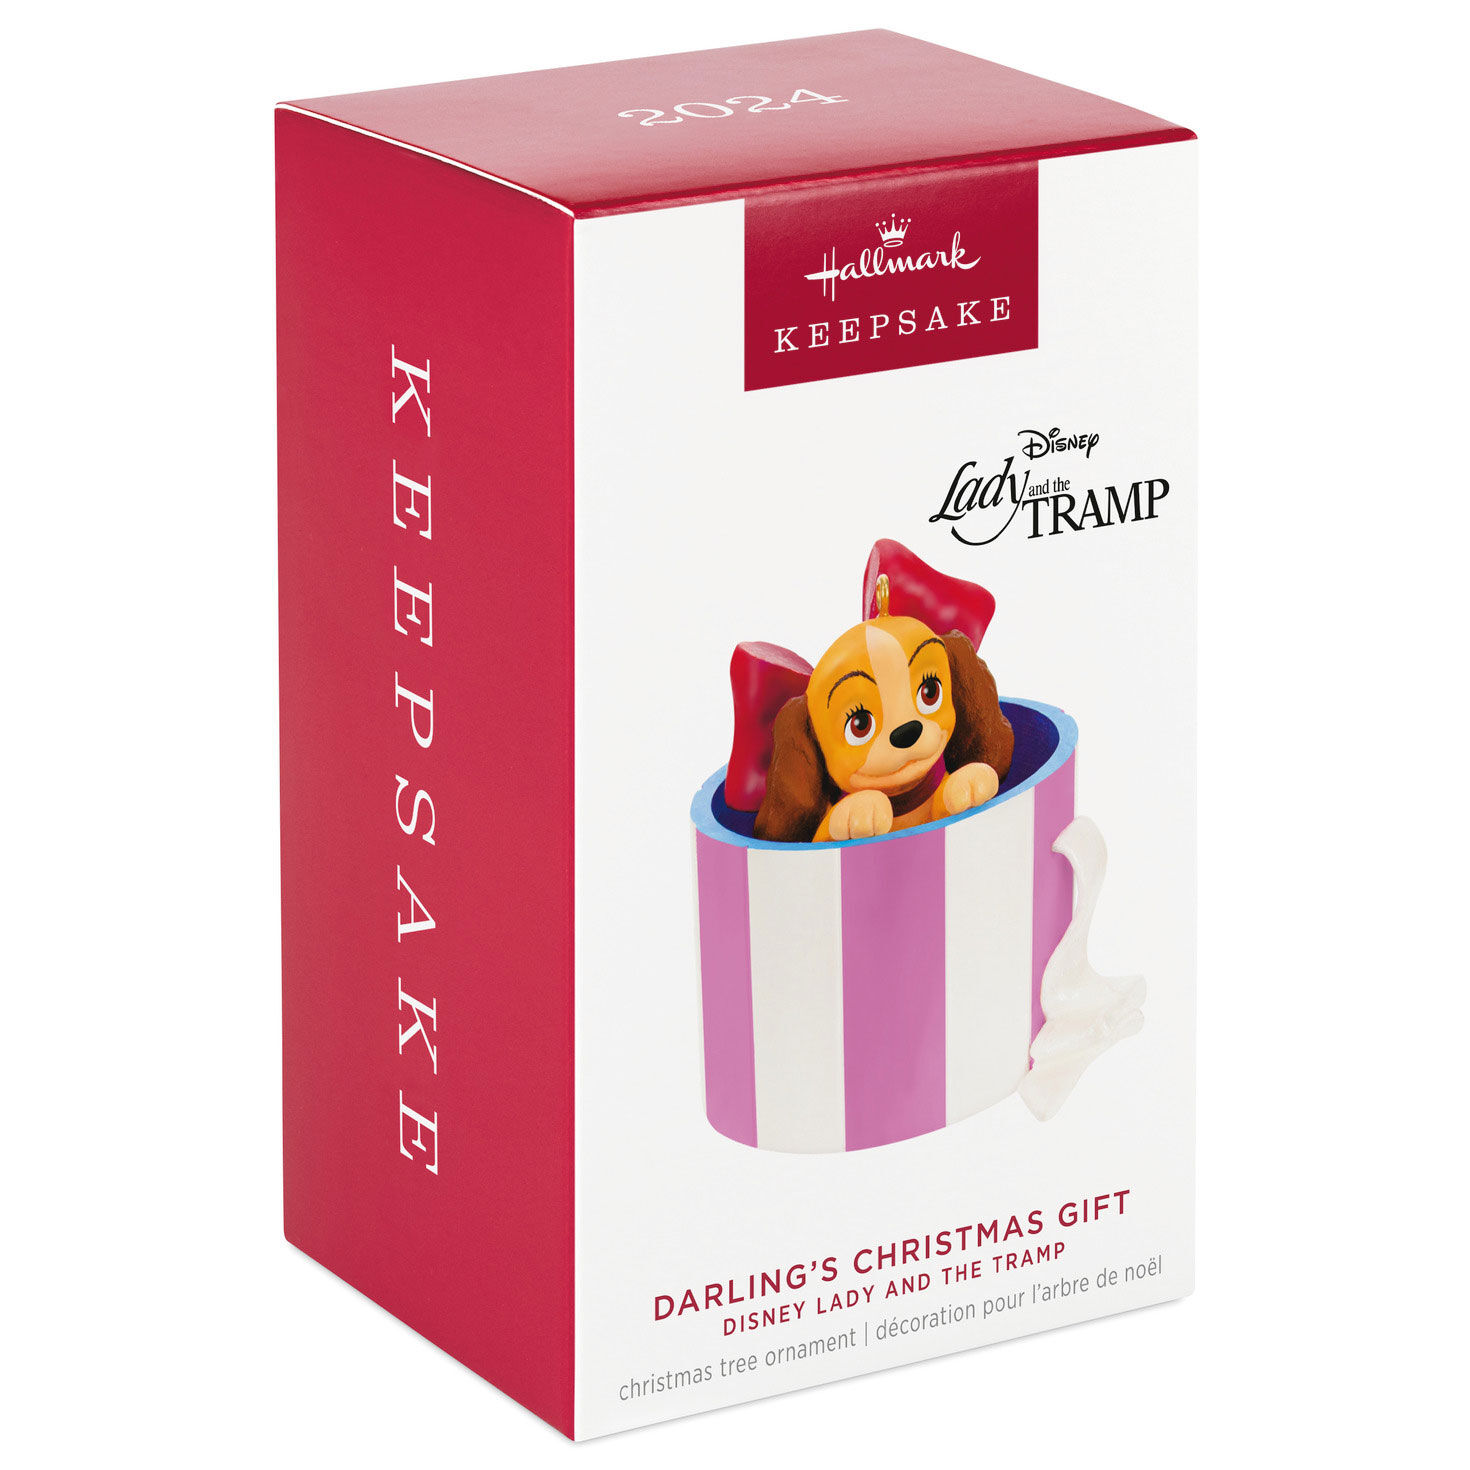 Disney Lady and the Tramp Darling's Christmas Gift Ornament for only USD 19.99 | Hallmark